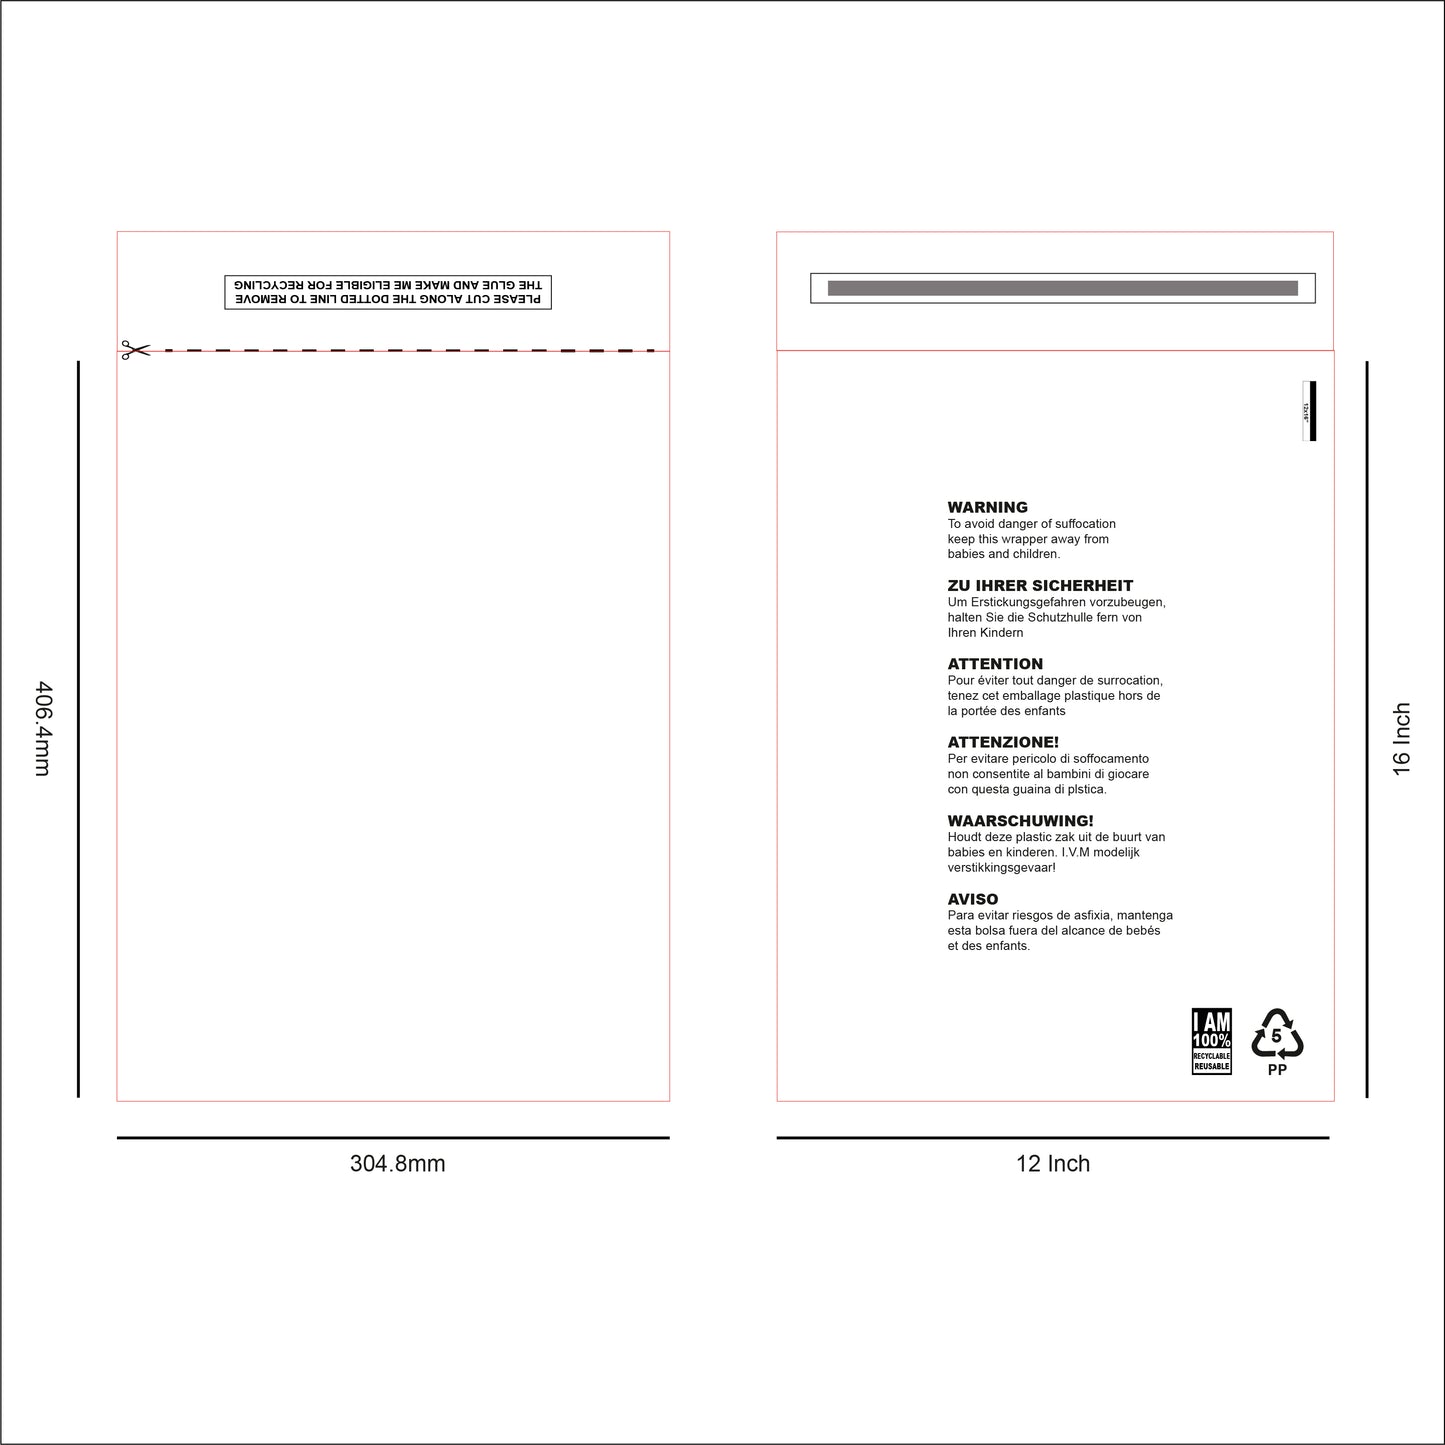 12 x 16 Resealable Clear mailing bag design